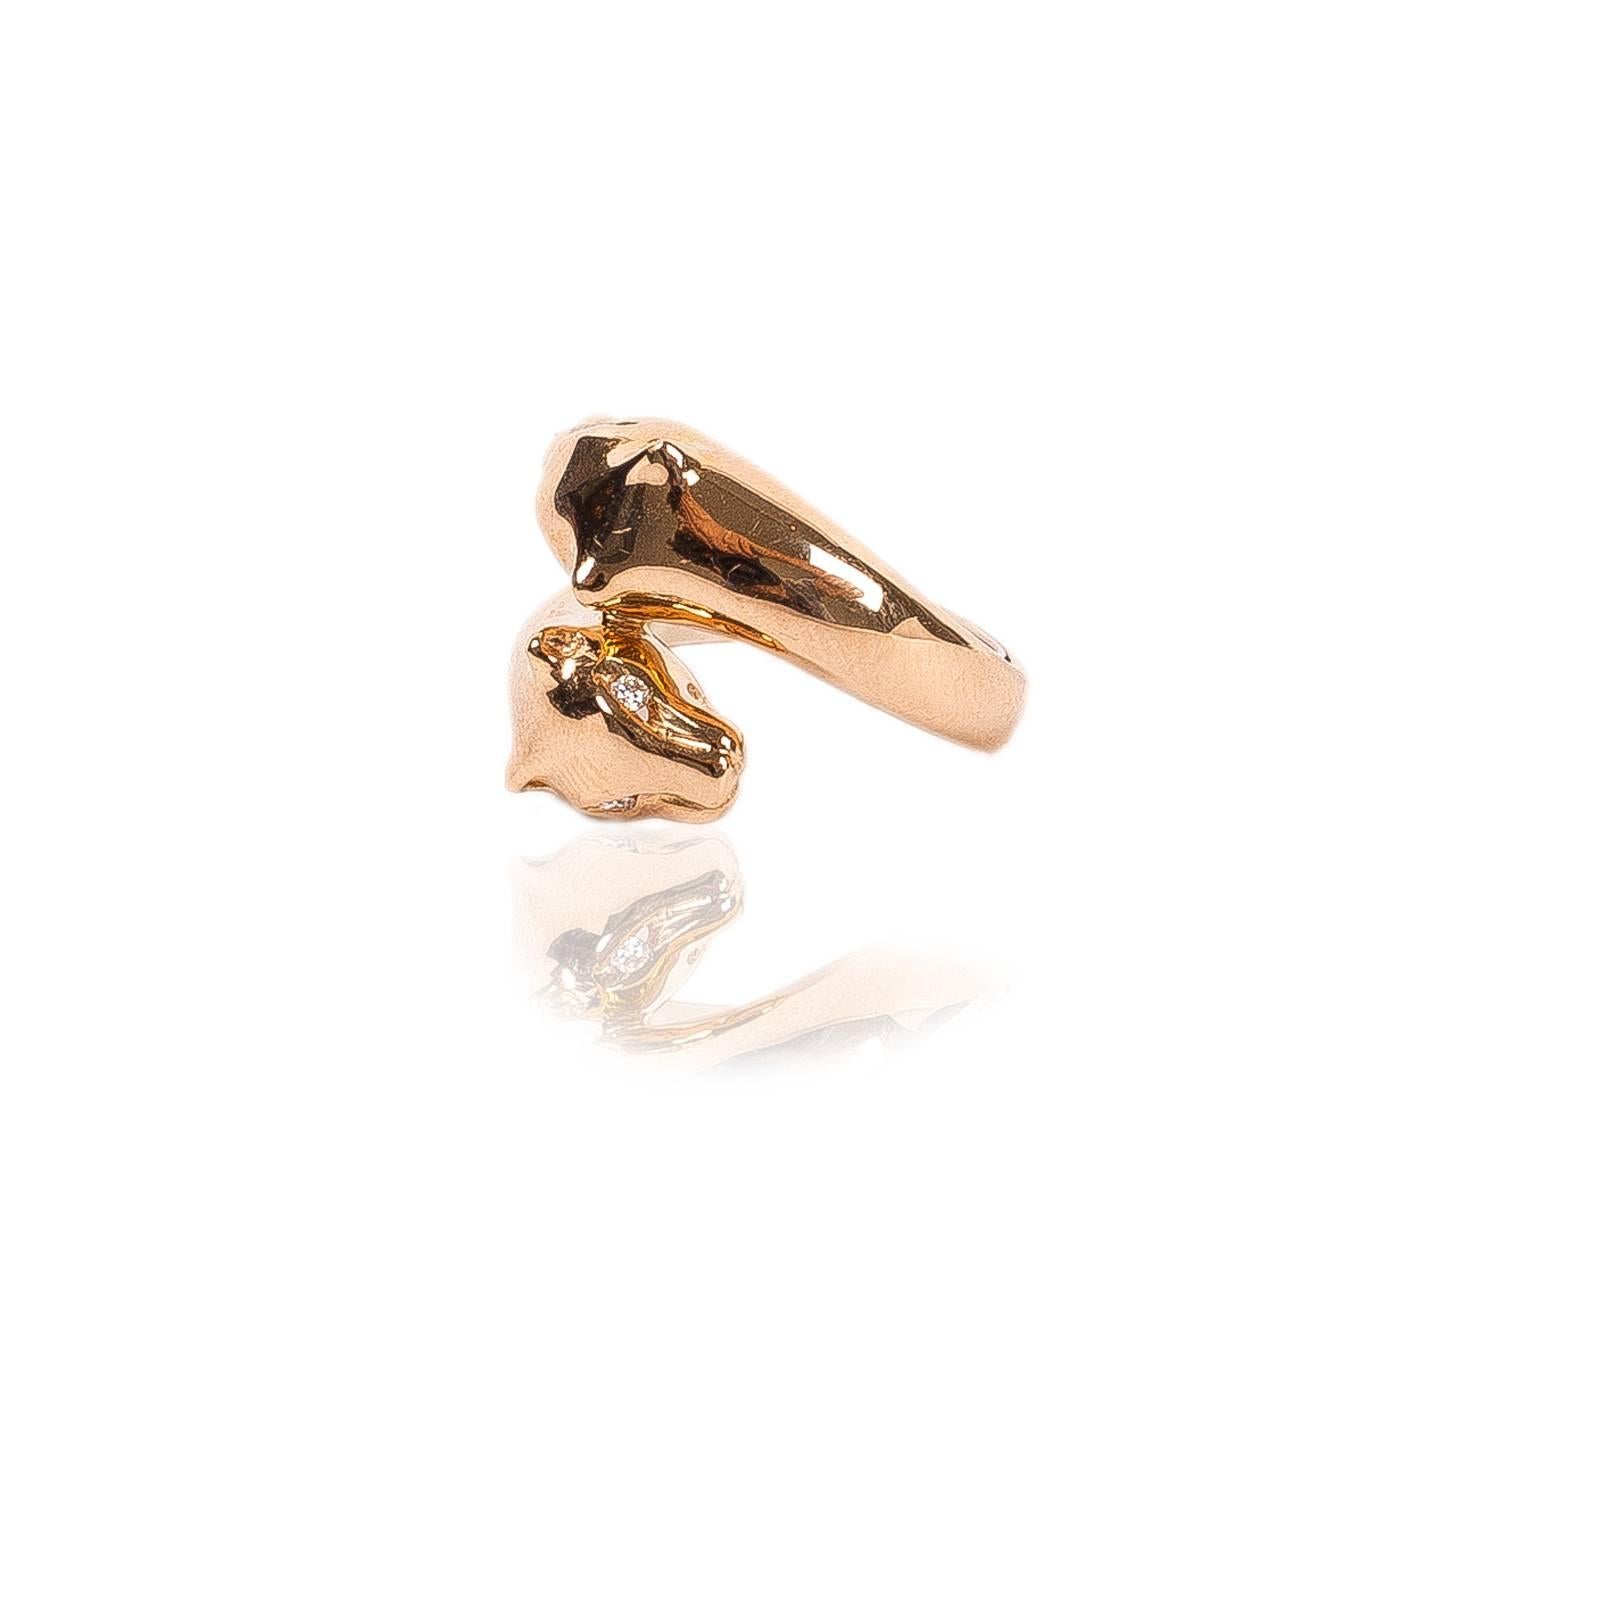 18kt Rose Gold ring with white diamonds ct. 0,06.

Handmade in Italy

Made-to-order production time: 4 weeks